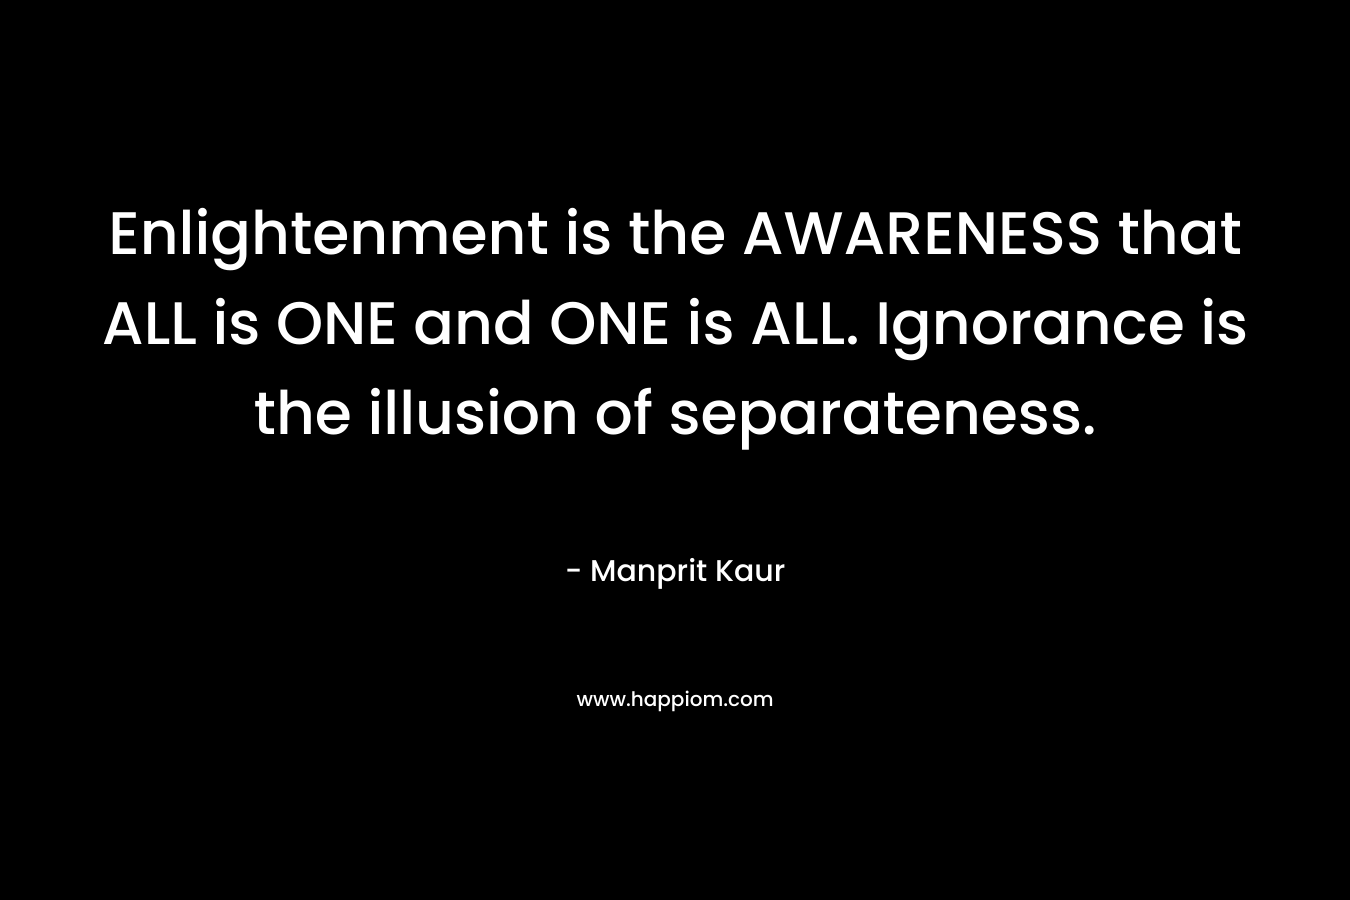 Enlightenment is the AWARENESS that ALL is ONE and ONE is ALL. Ignorance is the illusion of separateness. – Manprit Kaur